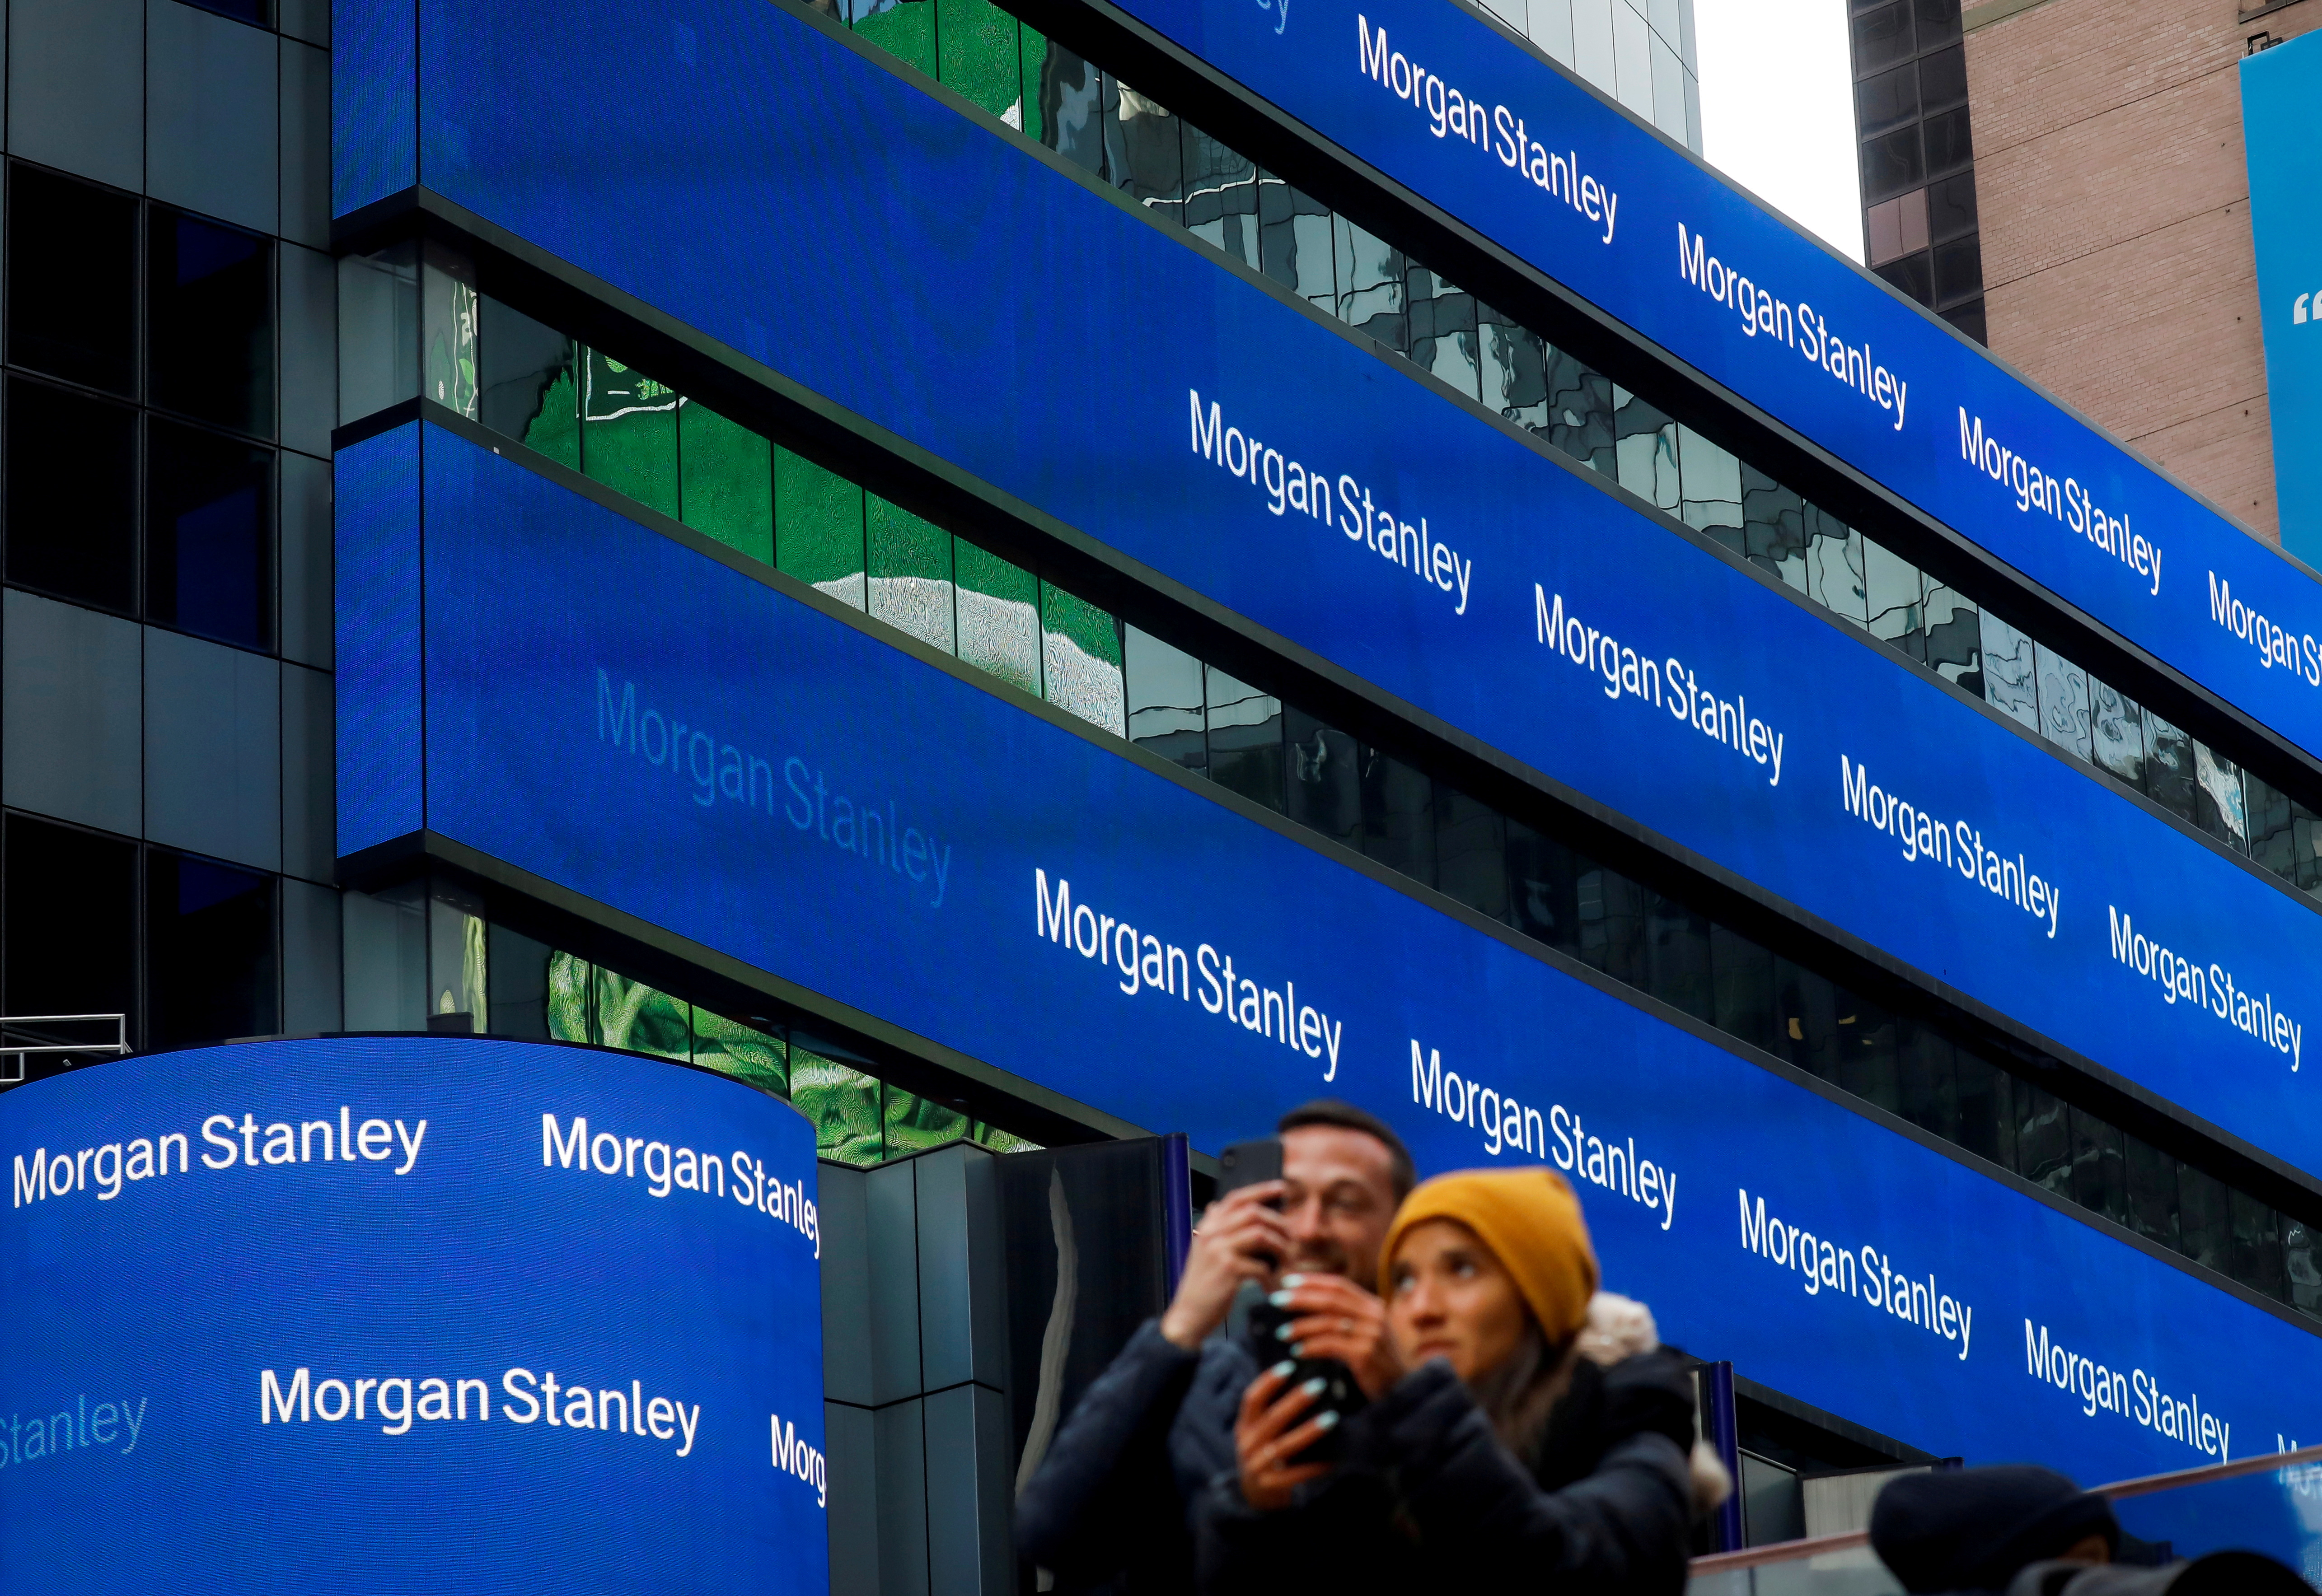 Exclusive: Morgan Stanley to start layoffs in coming weeks as dealmaking slows